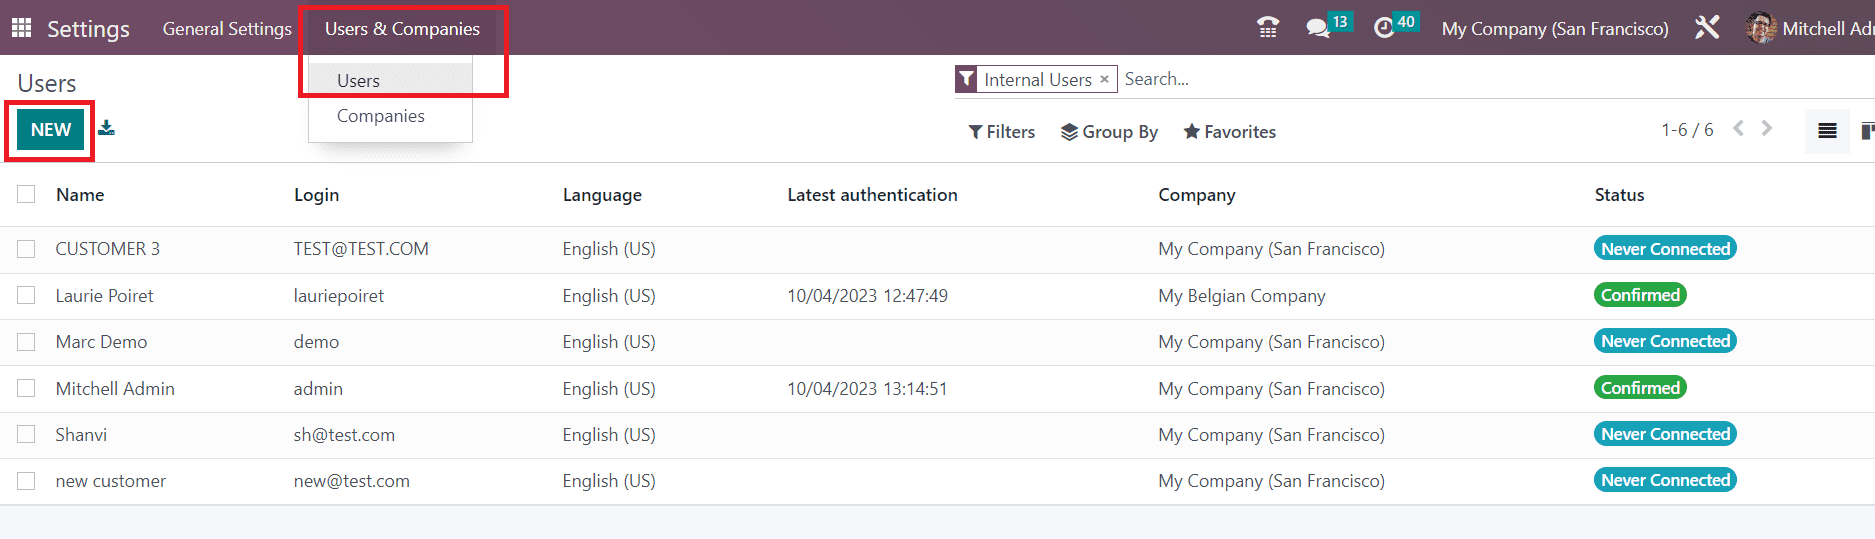 How to Import Master Data for Managing HR in Odoo 16-cybrosys